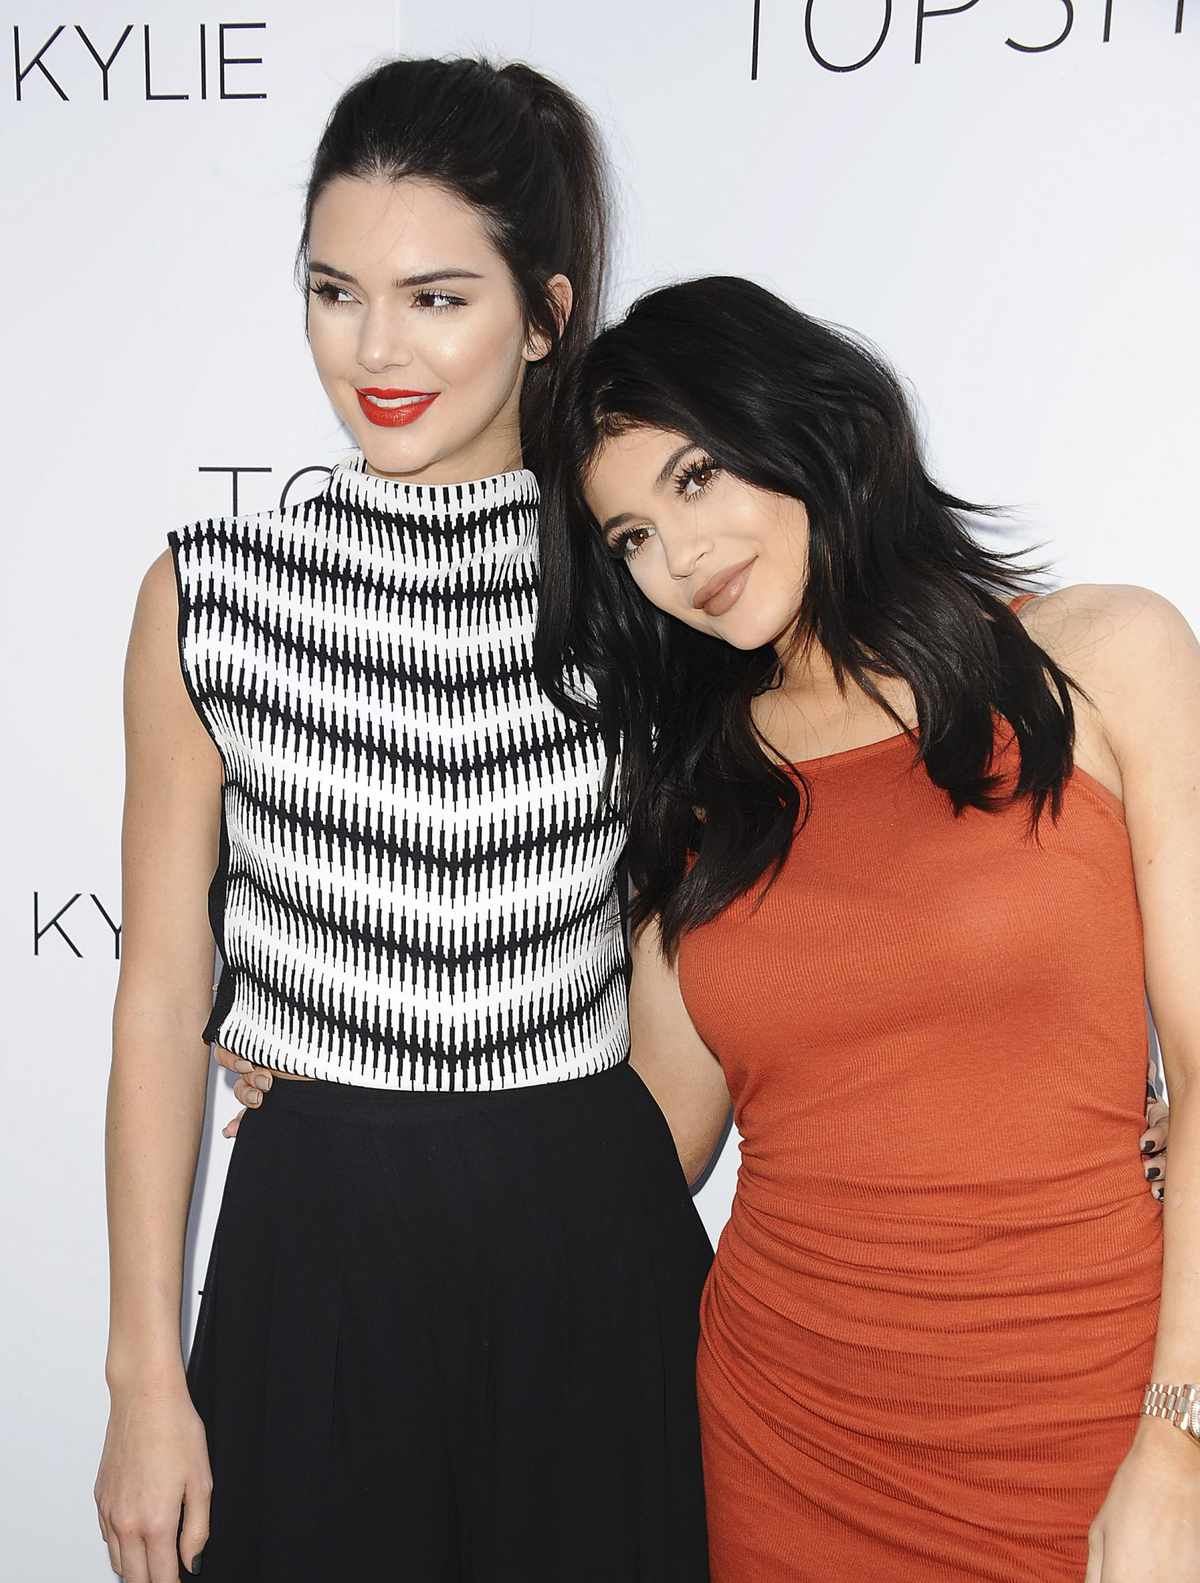 Kendall Jenner and Kylie Jenner - June 3, 2015